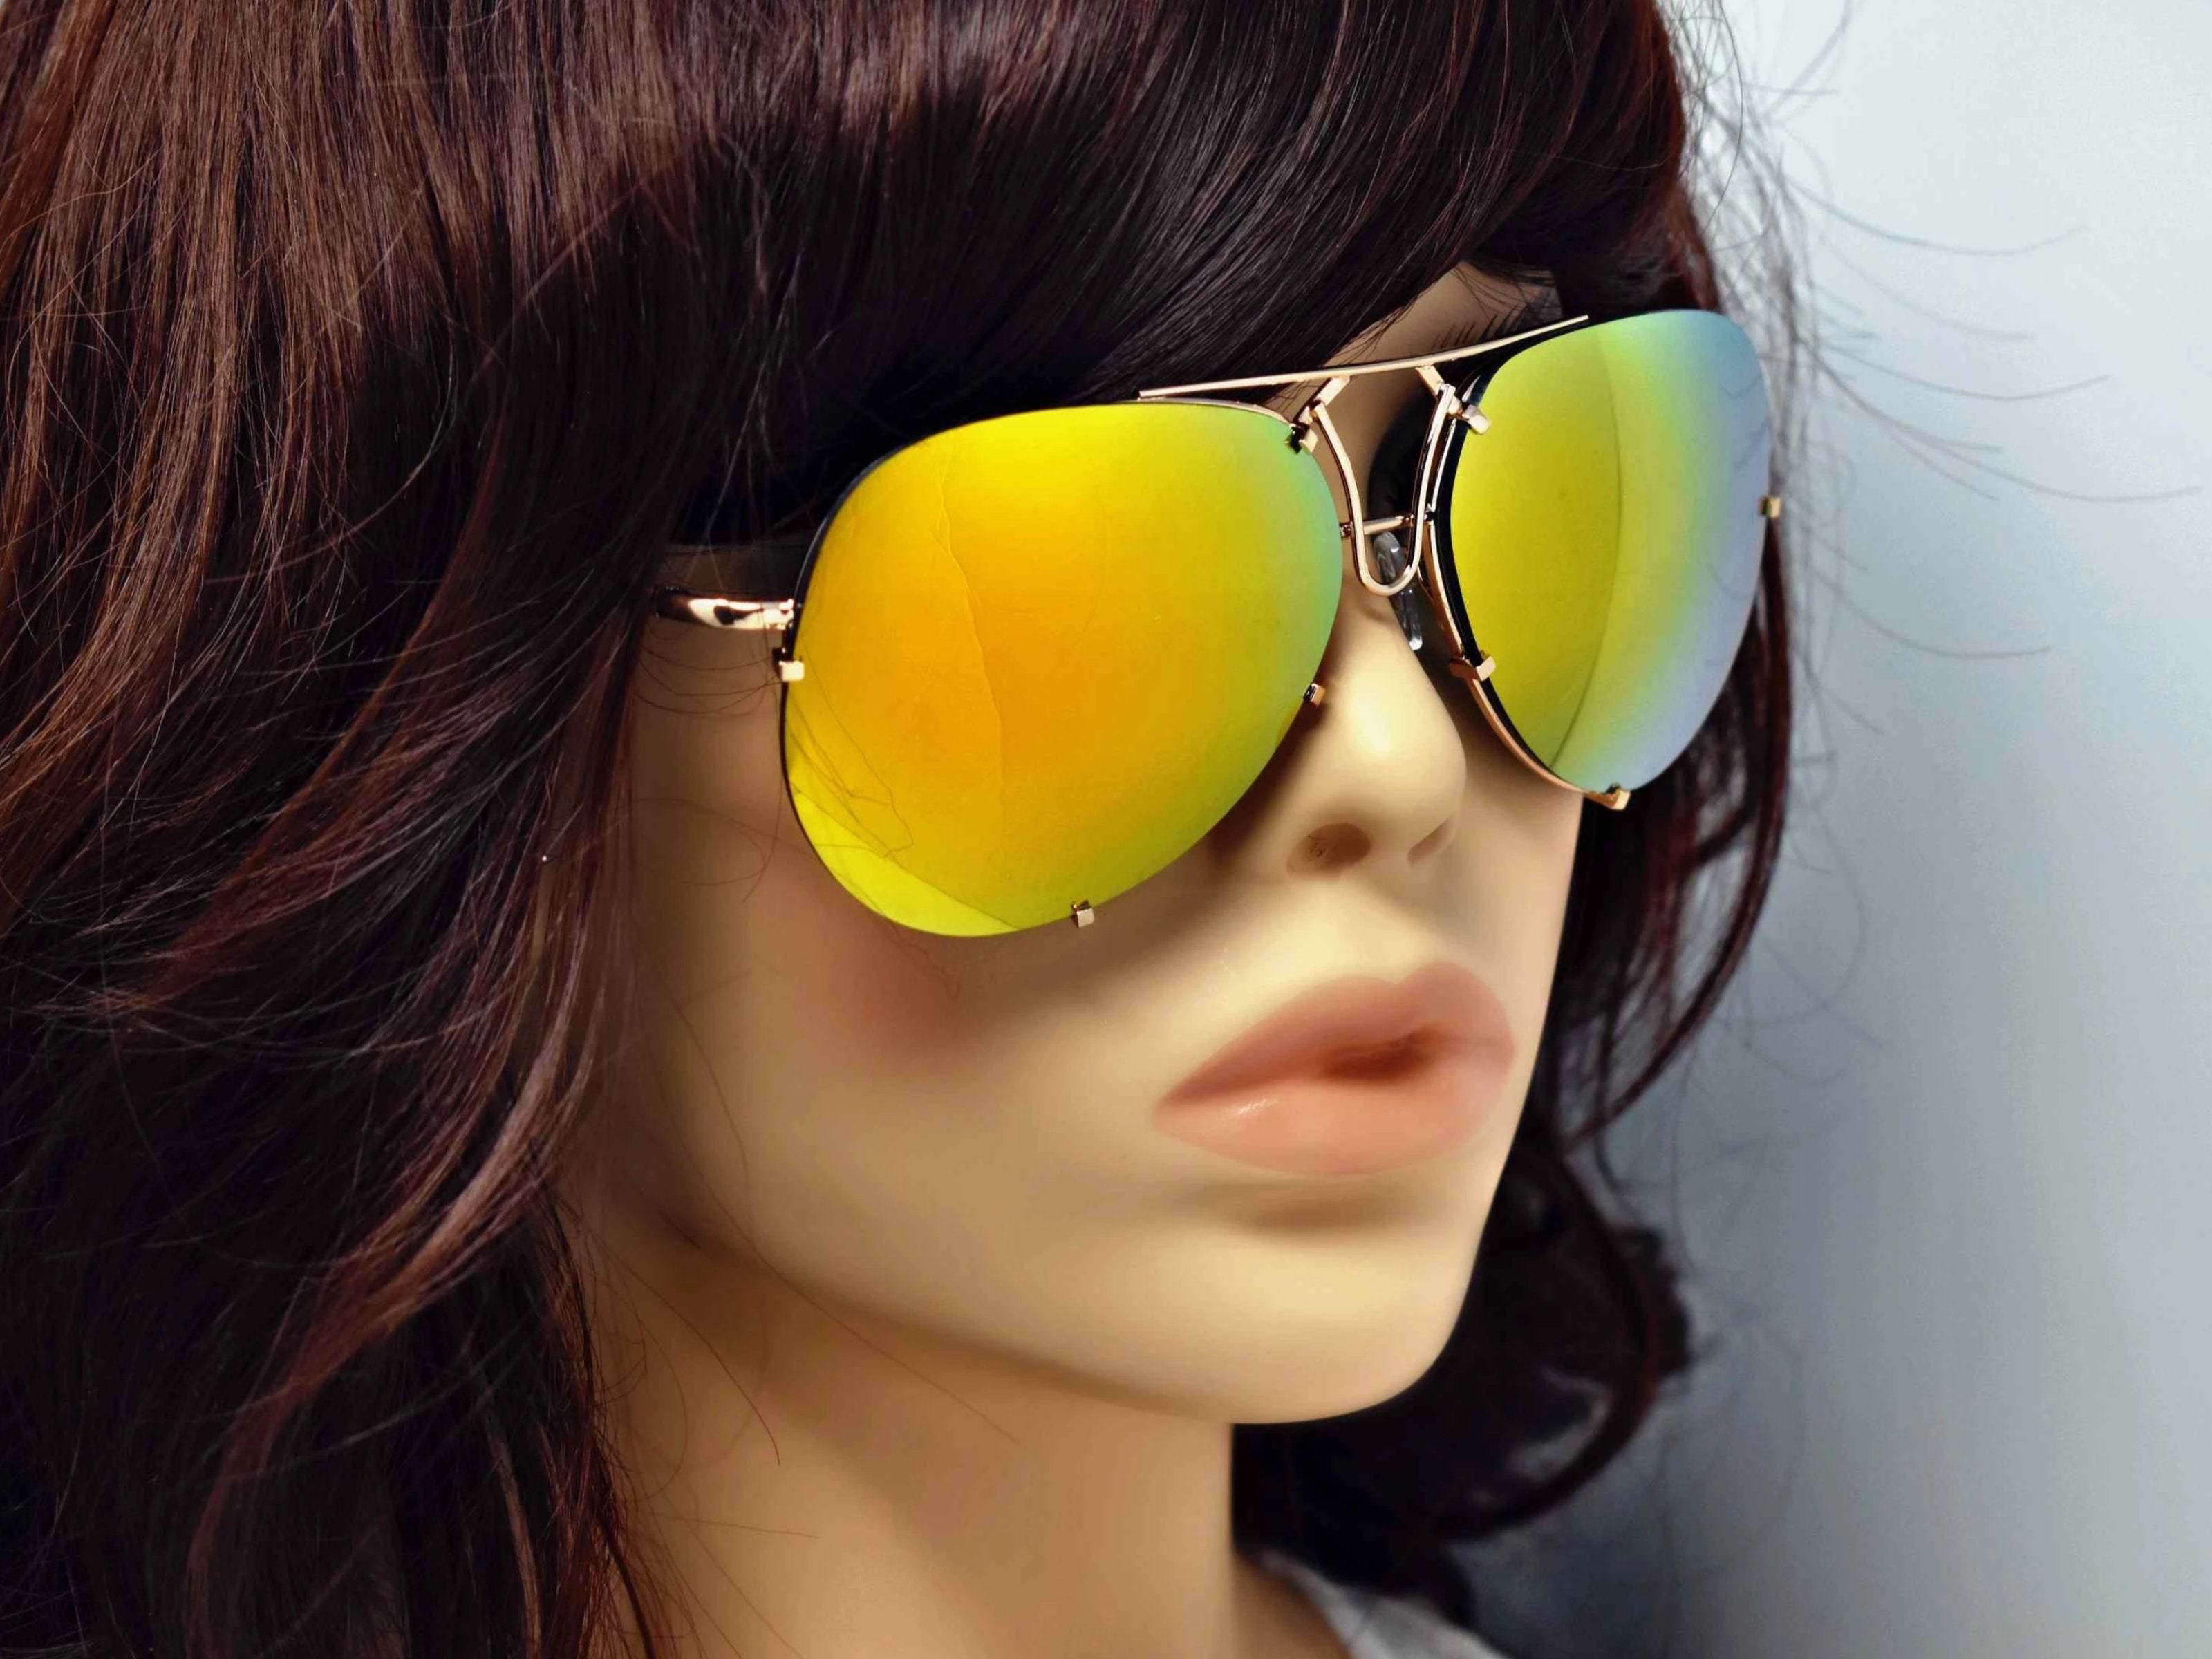 Don't get caught without these yarrow gold frame green mirrored lens aviator sunglasses.